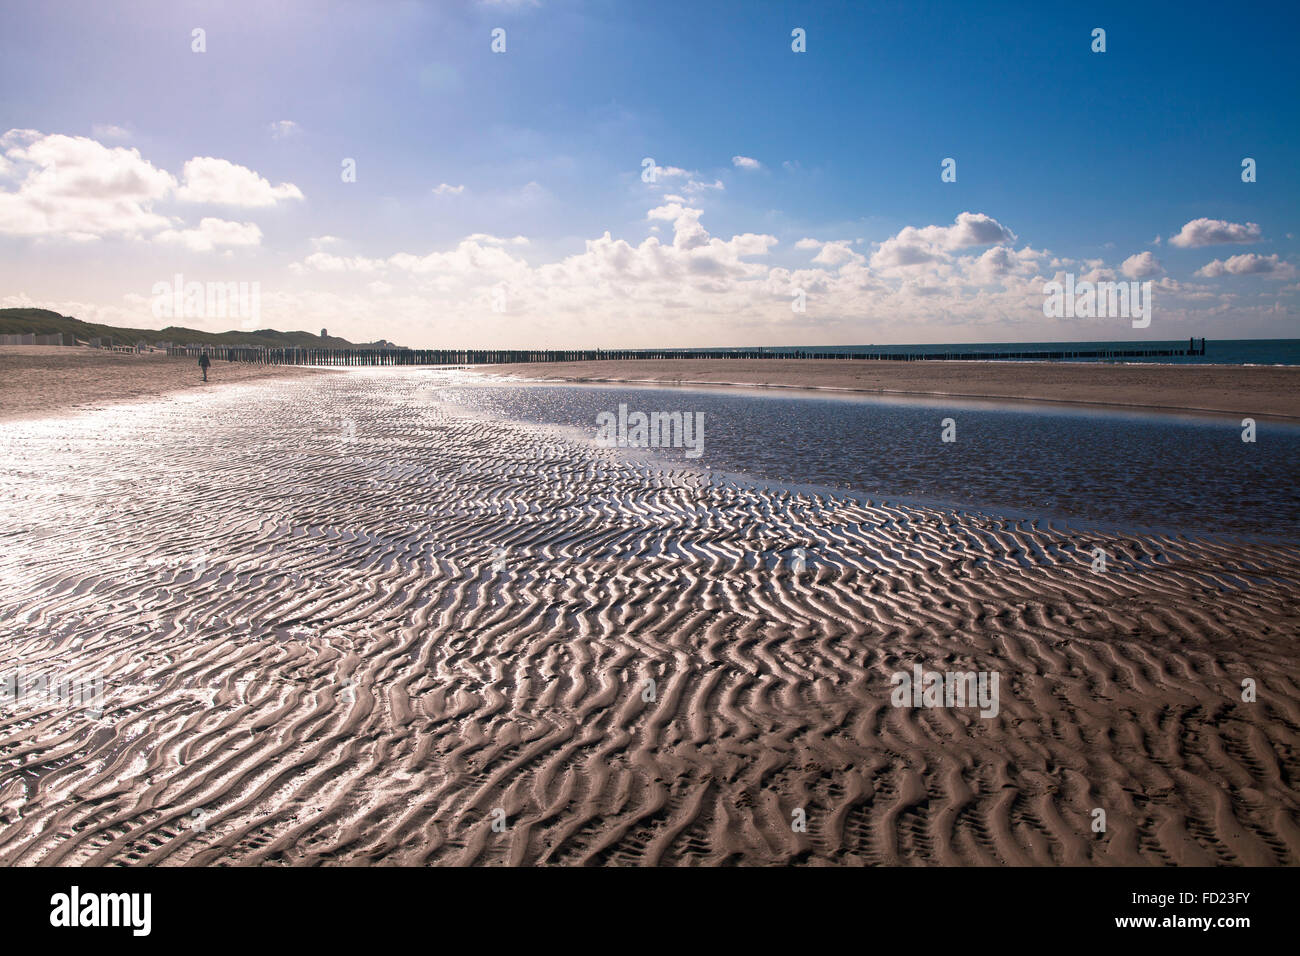 Europe, Netherlands, Zeeland, at the beach between Oostkapelle and Domburg on the peninsula Walcheren. Stock Photo